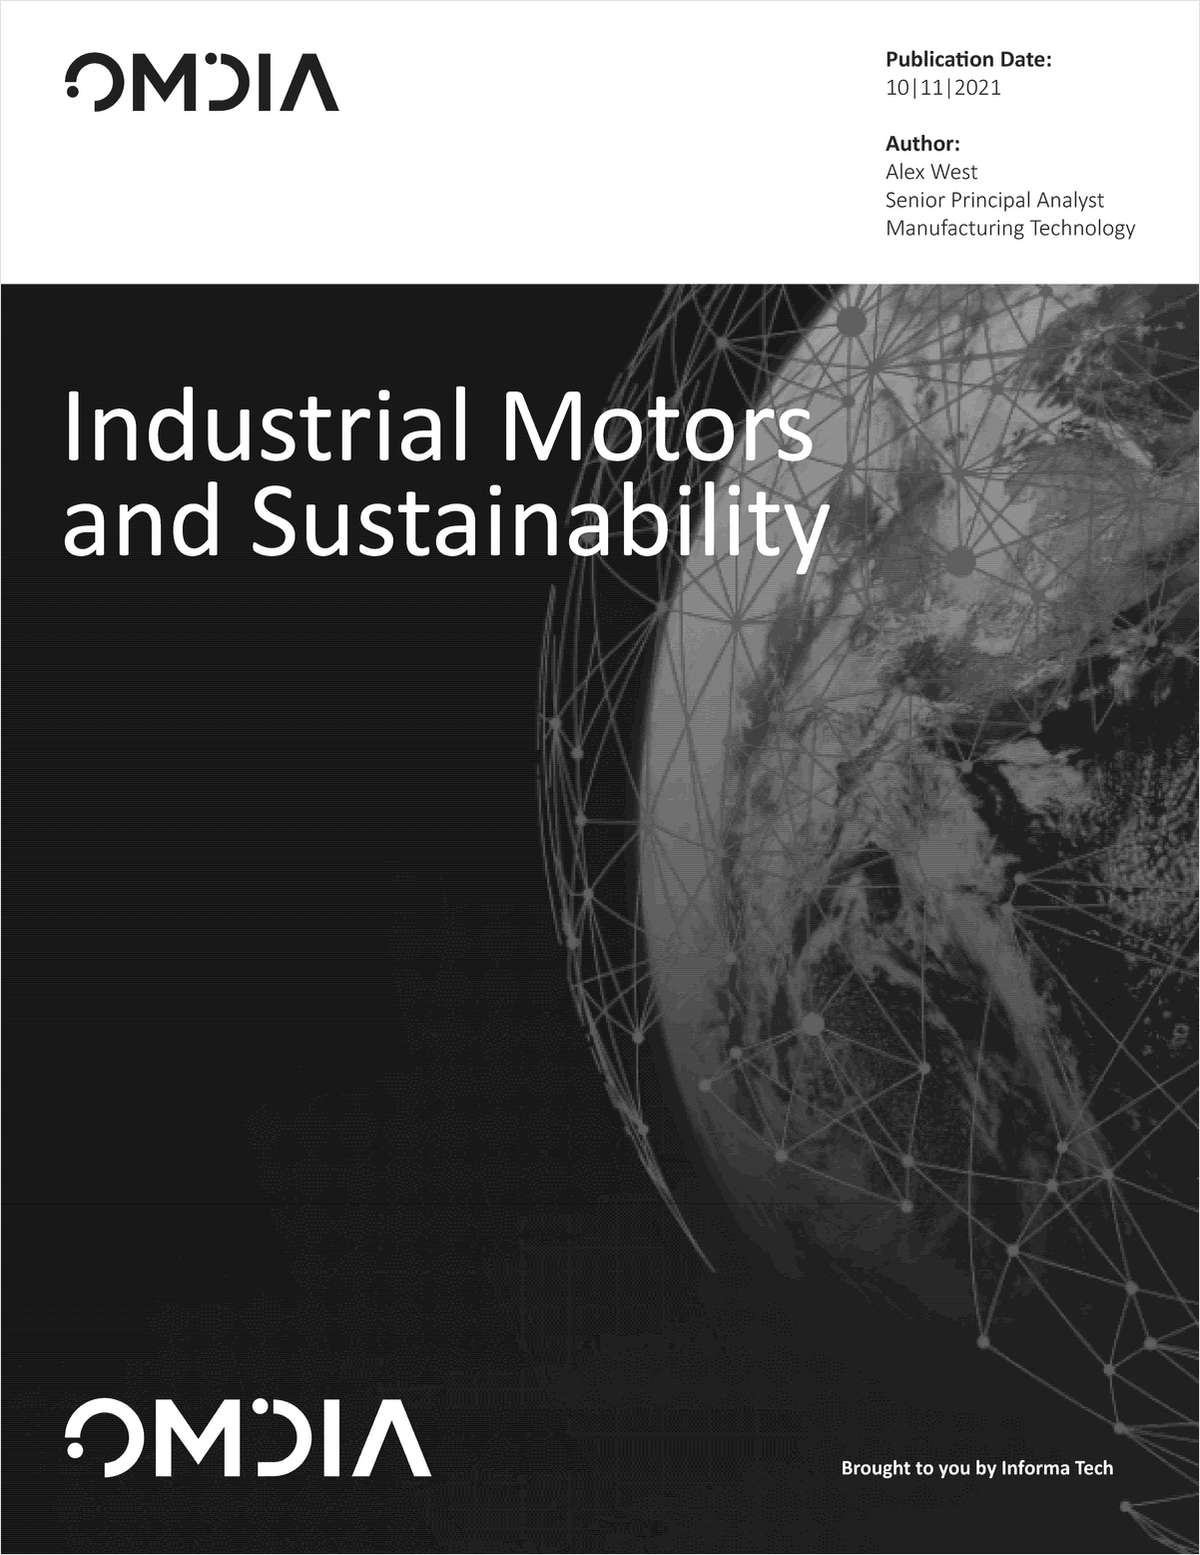 Industrial Sustainability and Motors -- Insights and Infographics